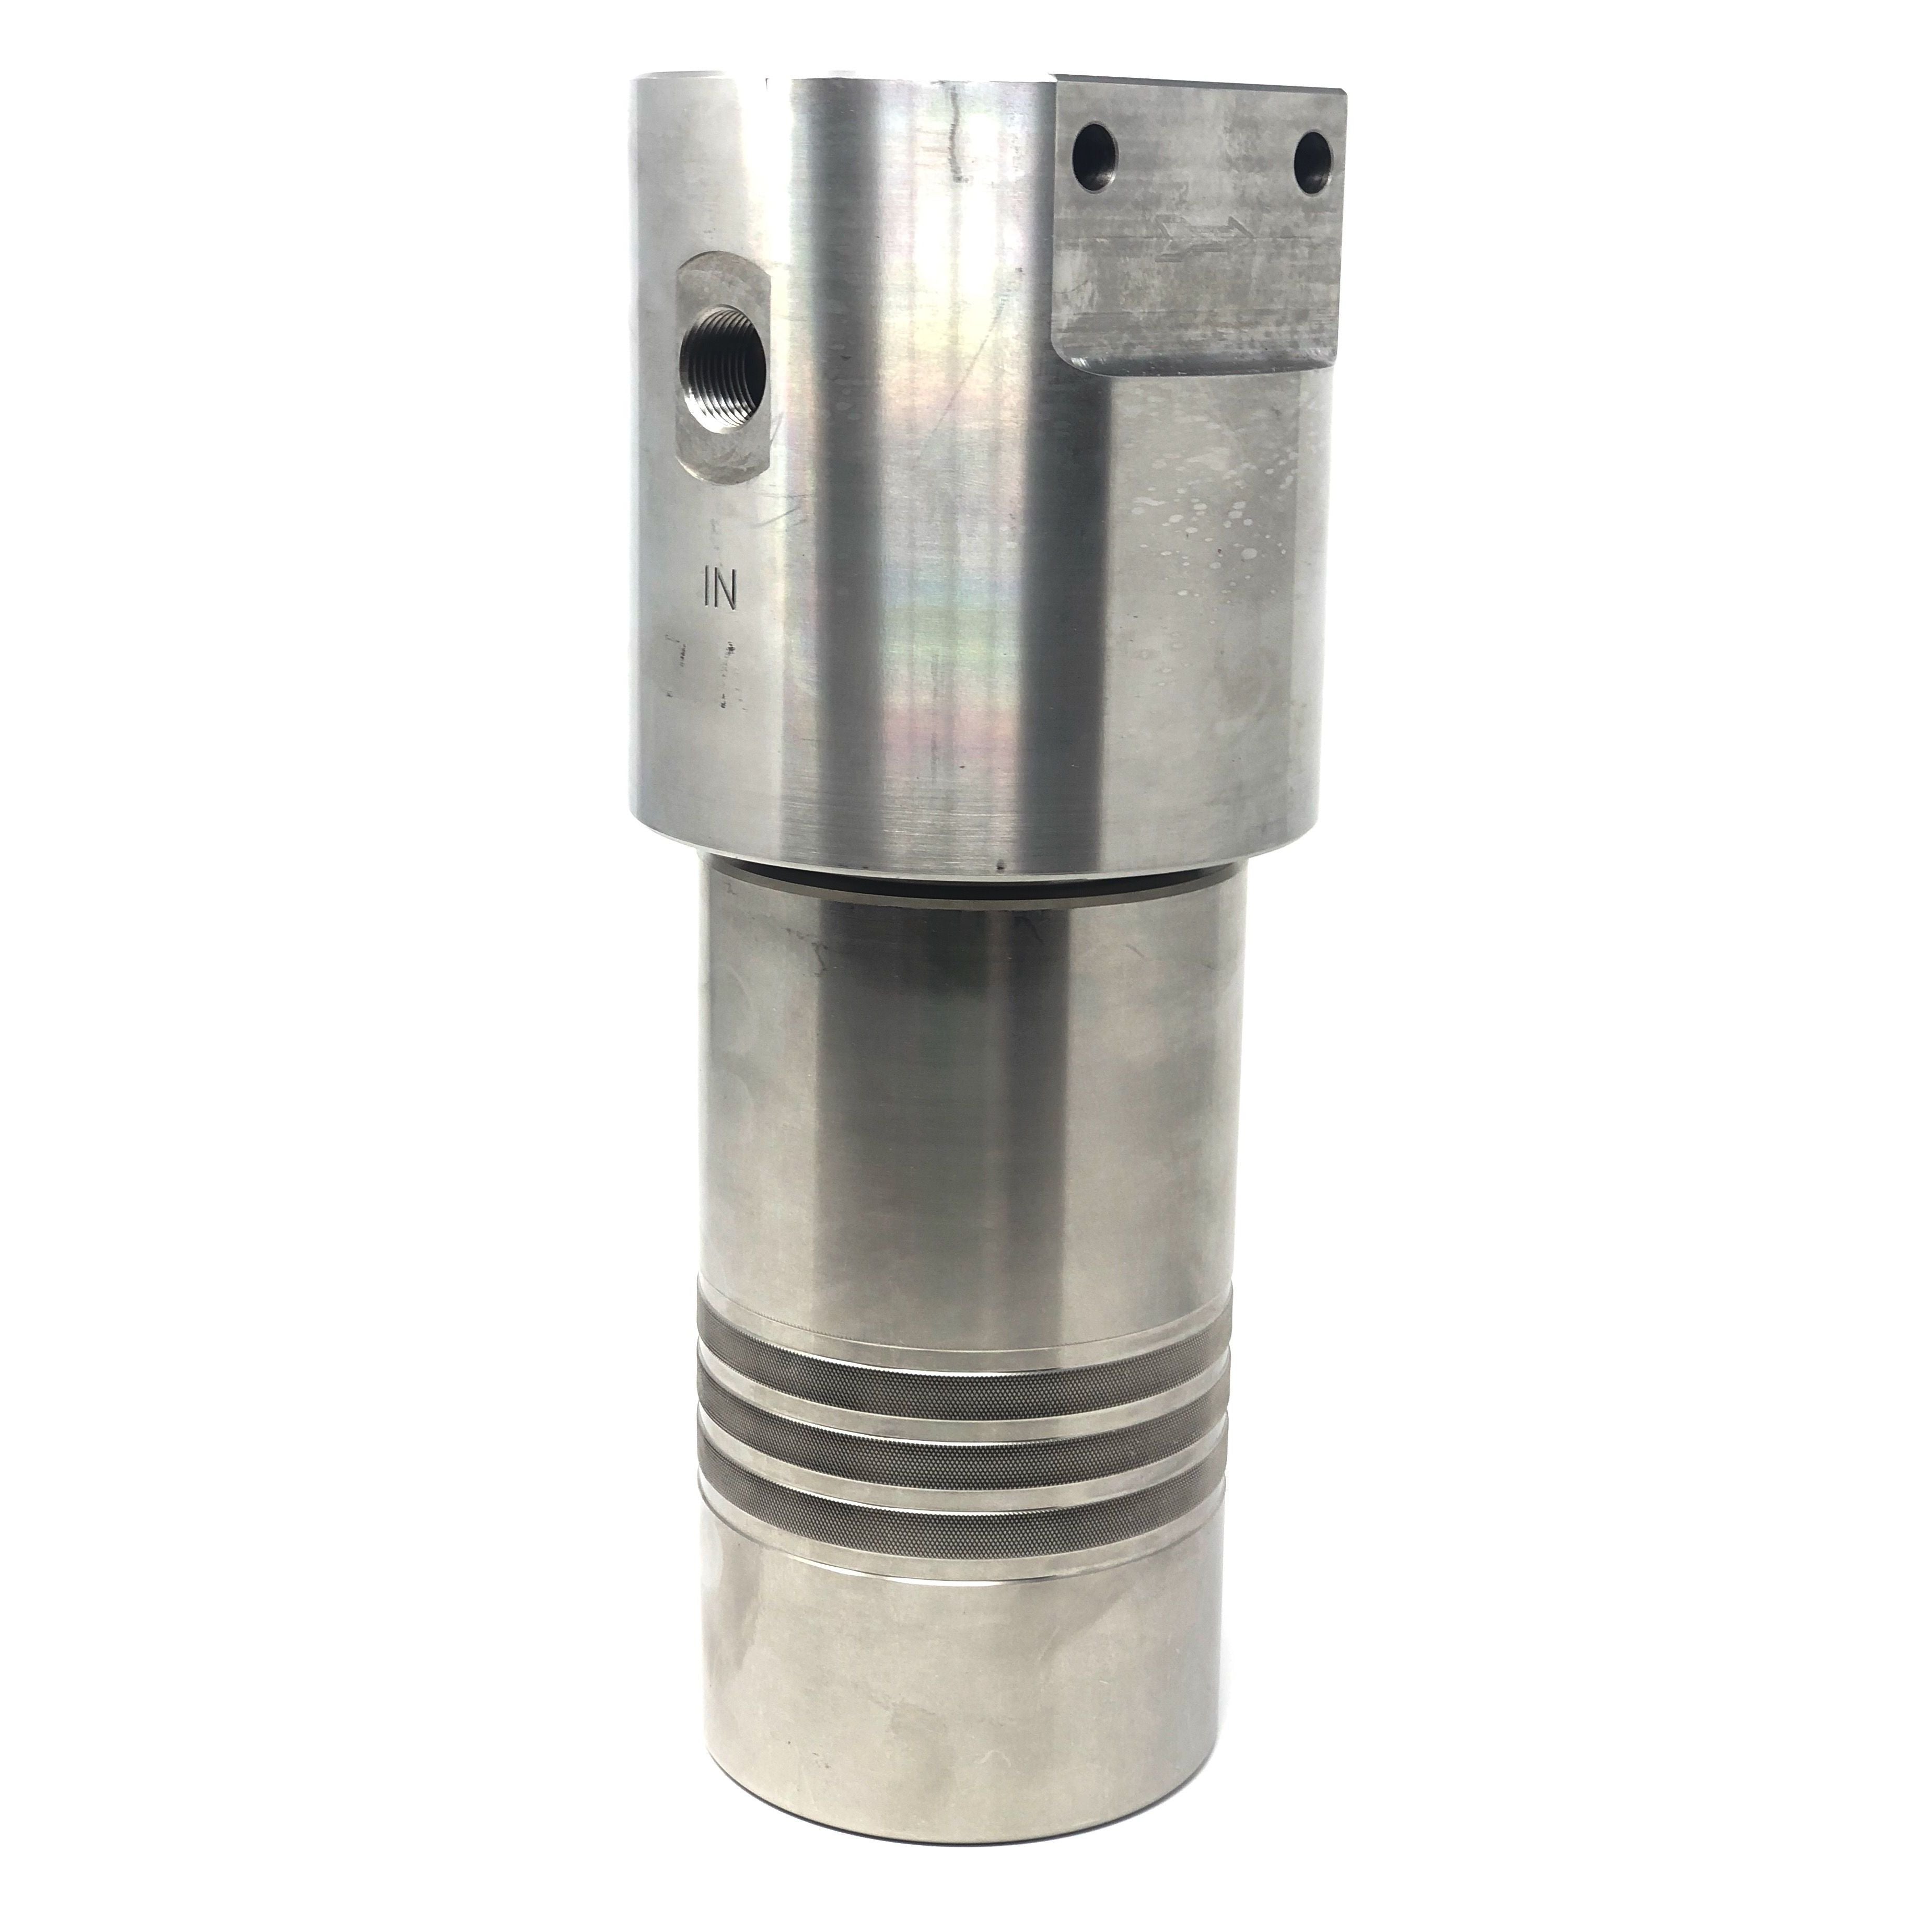 52S-168S-3MDN : Chase Ultra High Pressure Inline Filter, 10000psi, #8 SAE (1/2"), 3 Micron, With Visual Indicator, No Bypass